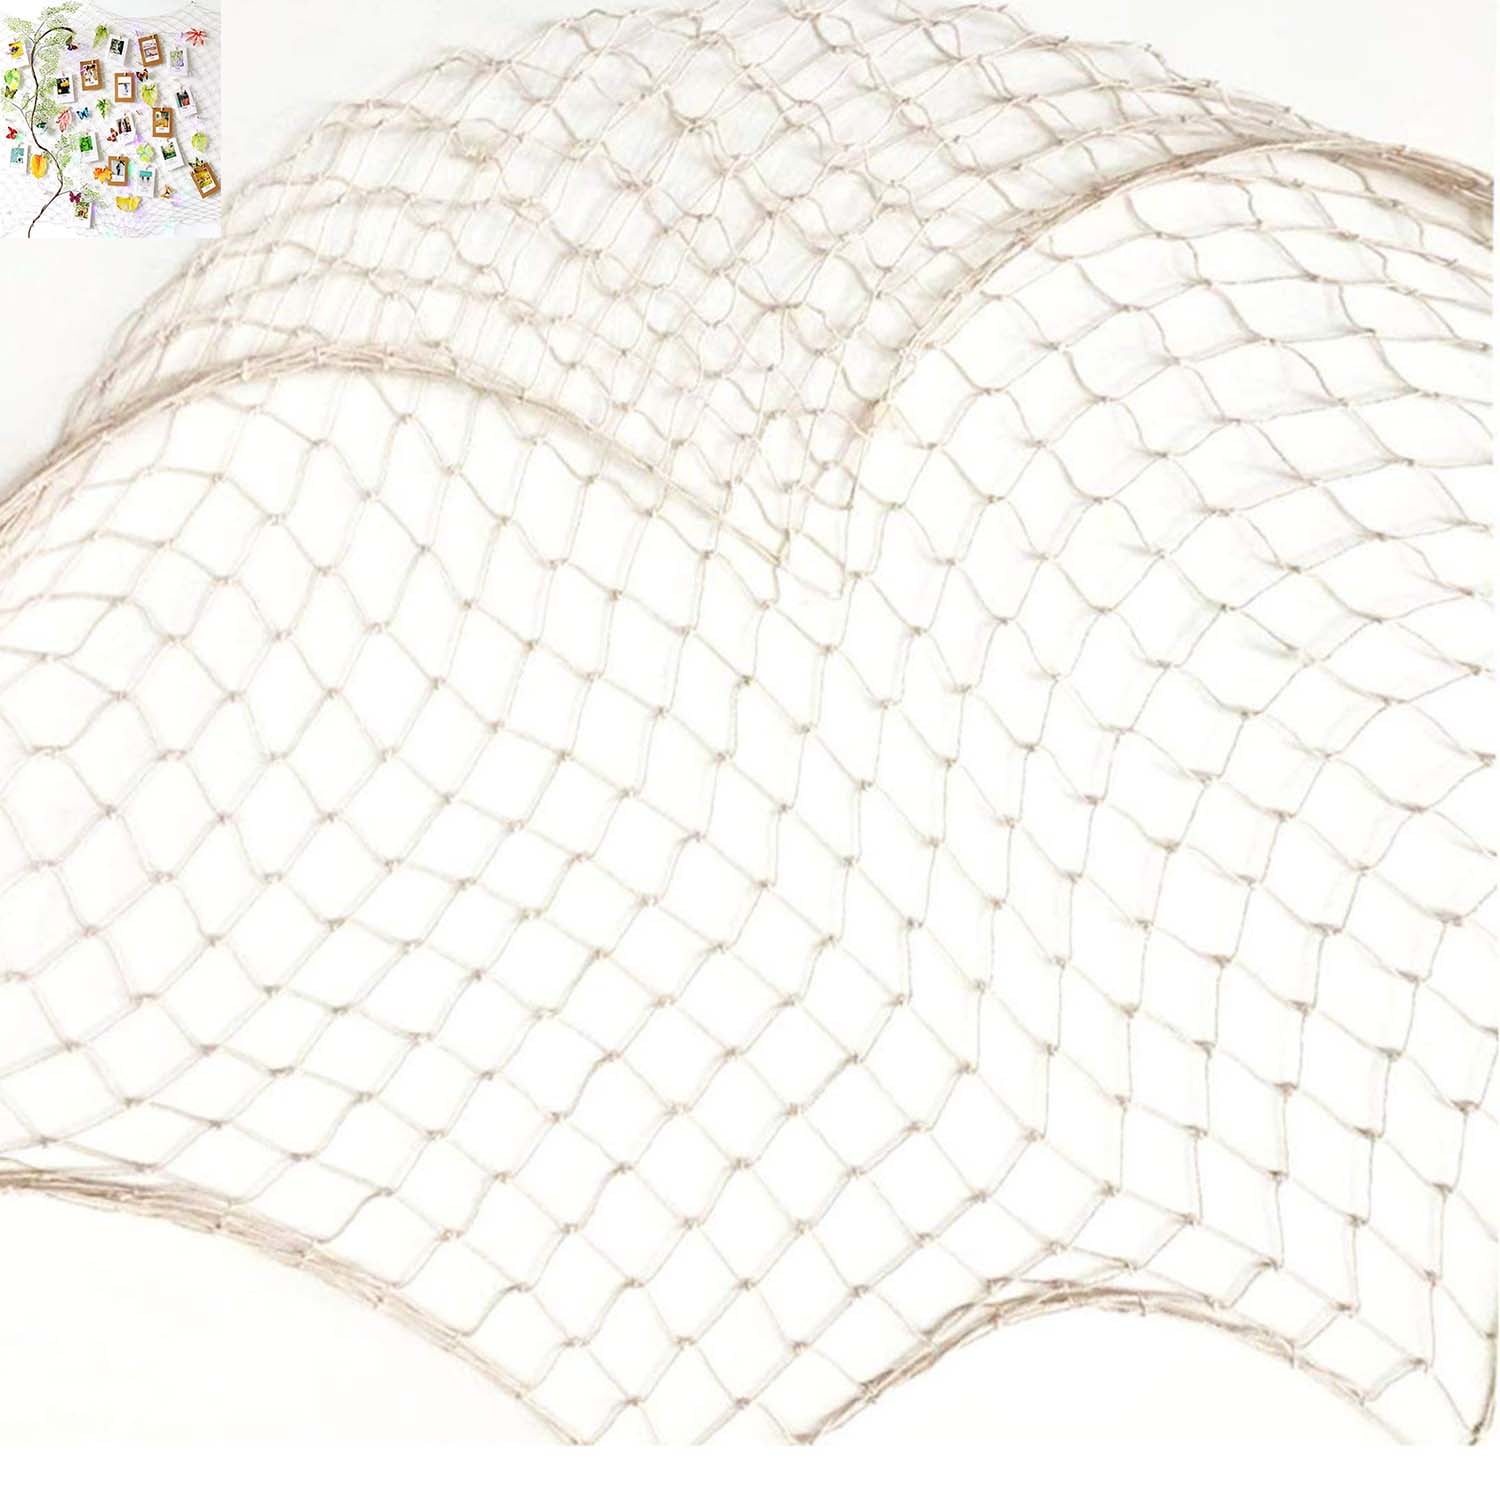 Creamy White Fishing Net Beach Theme Decor for Party Home Living Room  Bedroom Mediterranean Style Decor Wall Decoration - AliExpress